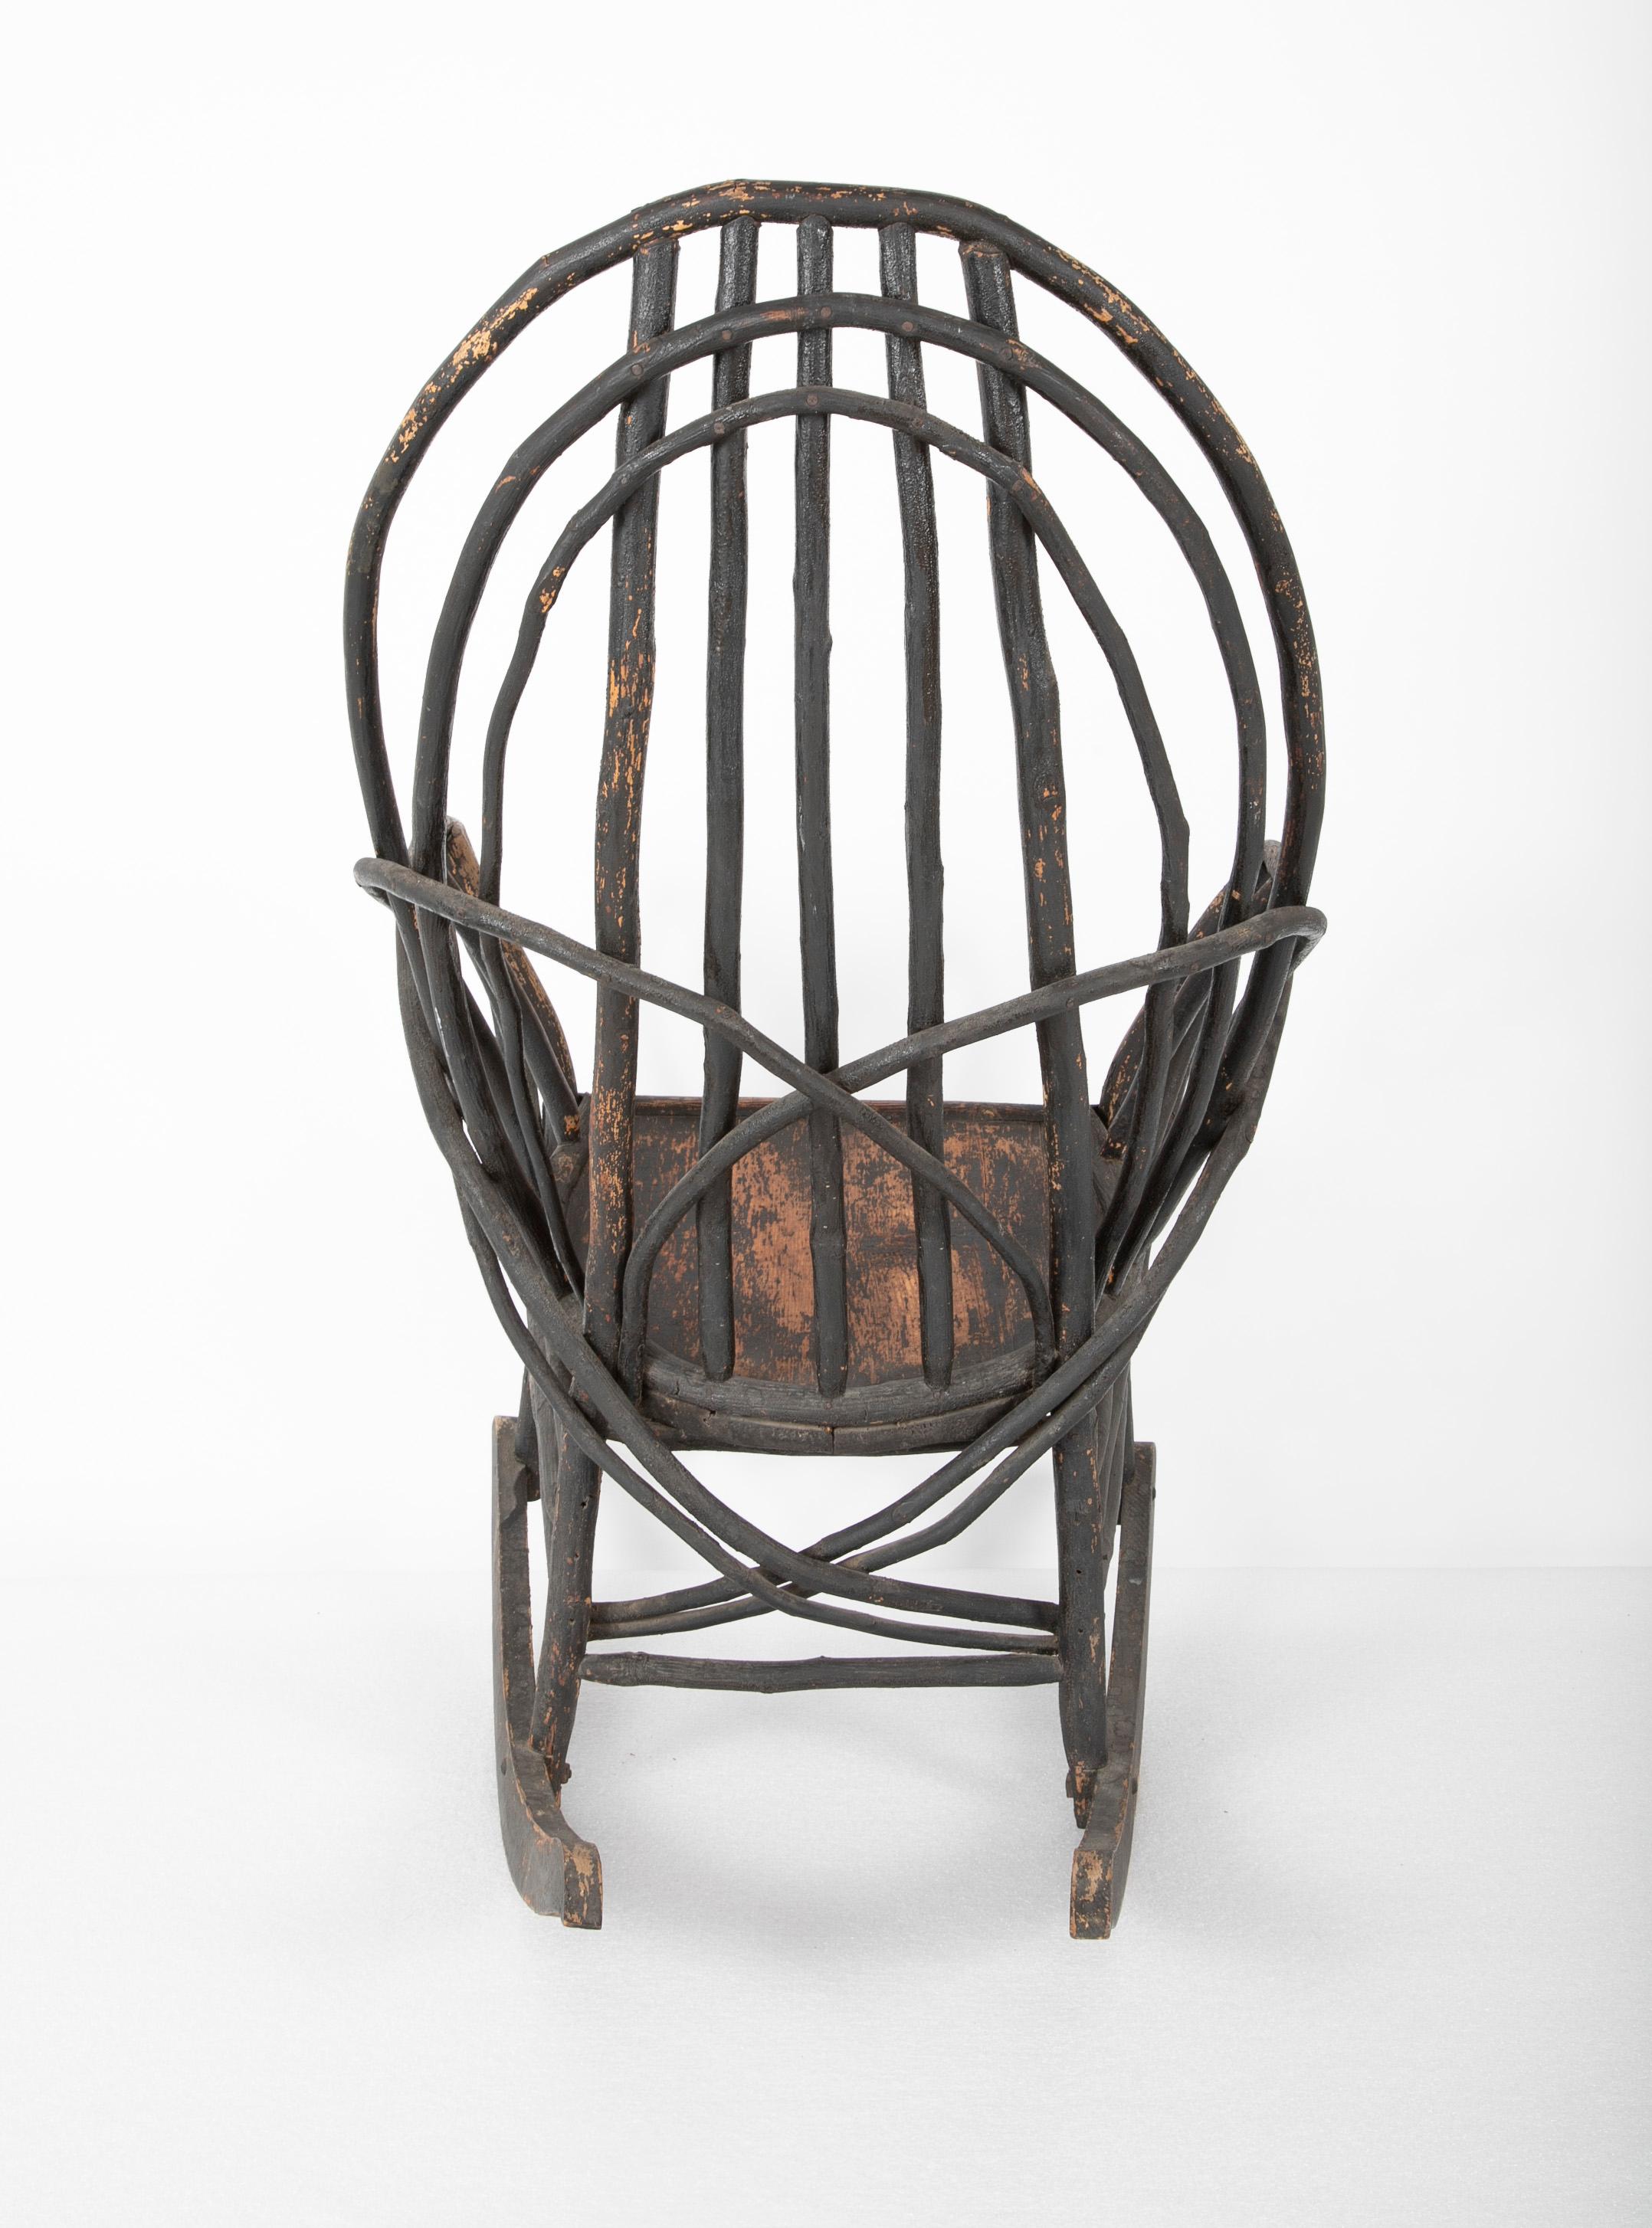 Bentwood Rustic Armchair-Rocker with Plank Seat & Traces of Early Black Paint 3